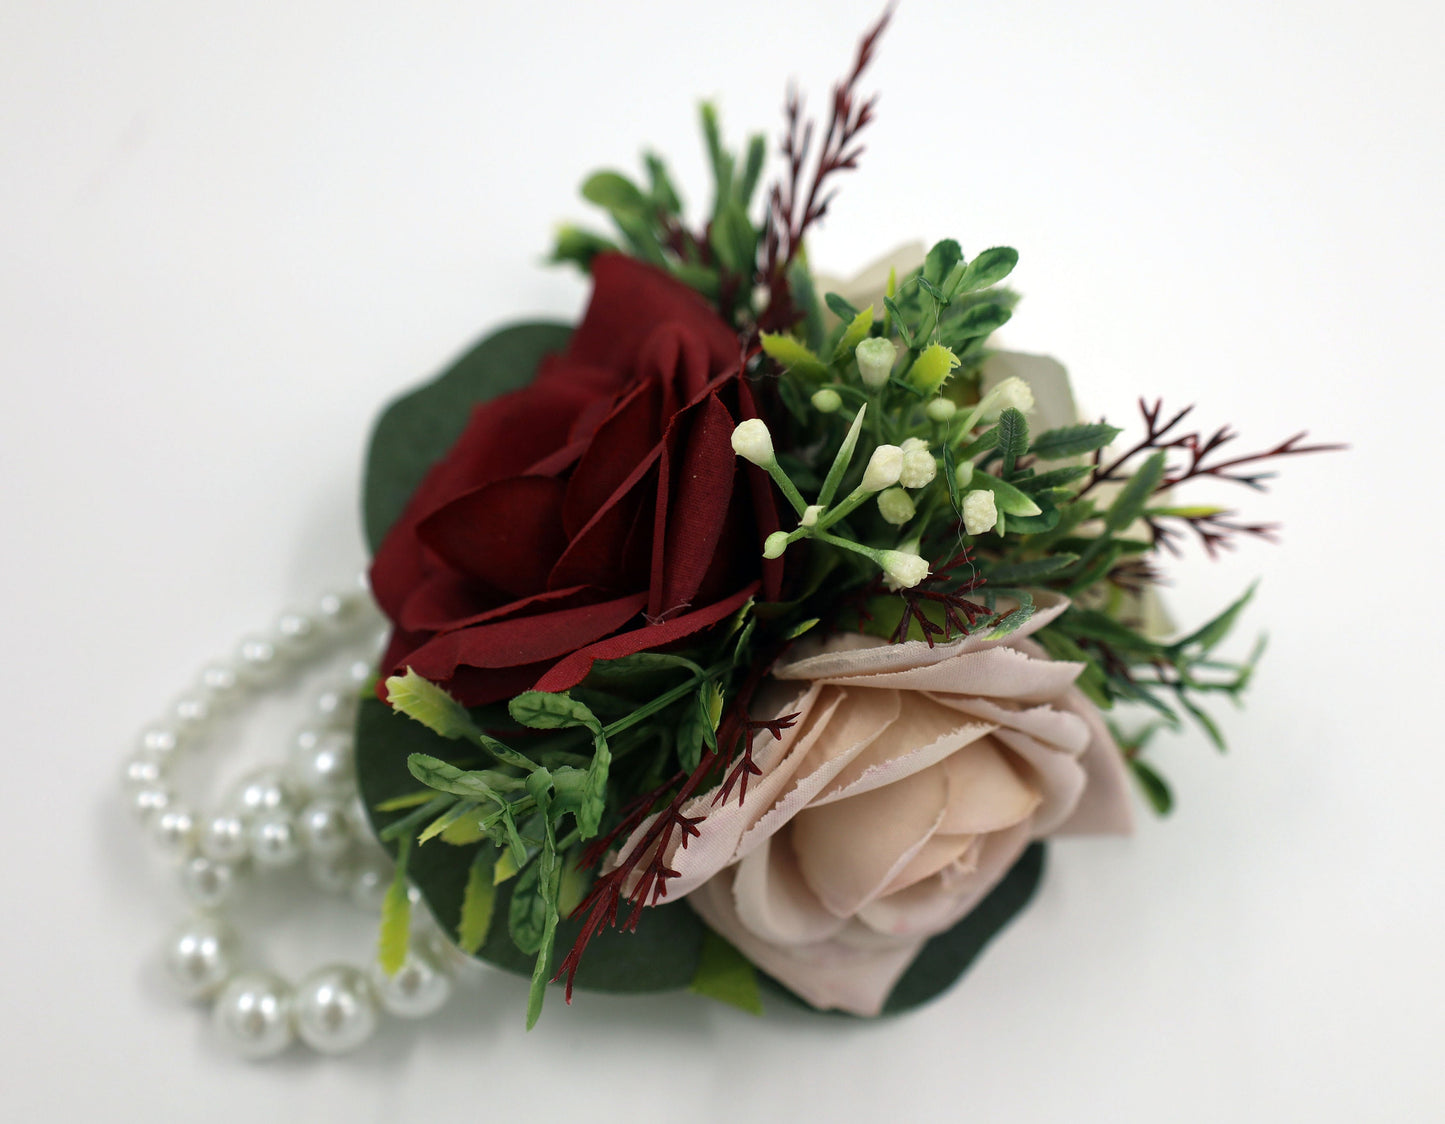 Burgundy Dusty Rose Ivory Wedding Bouquets, Faux Artificial Bridal and Bridesmaids Bouquets, Silk Wedding Flowers with Roses Eucalyptus